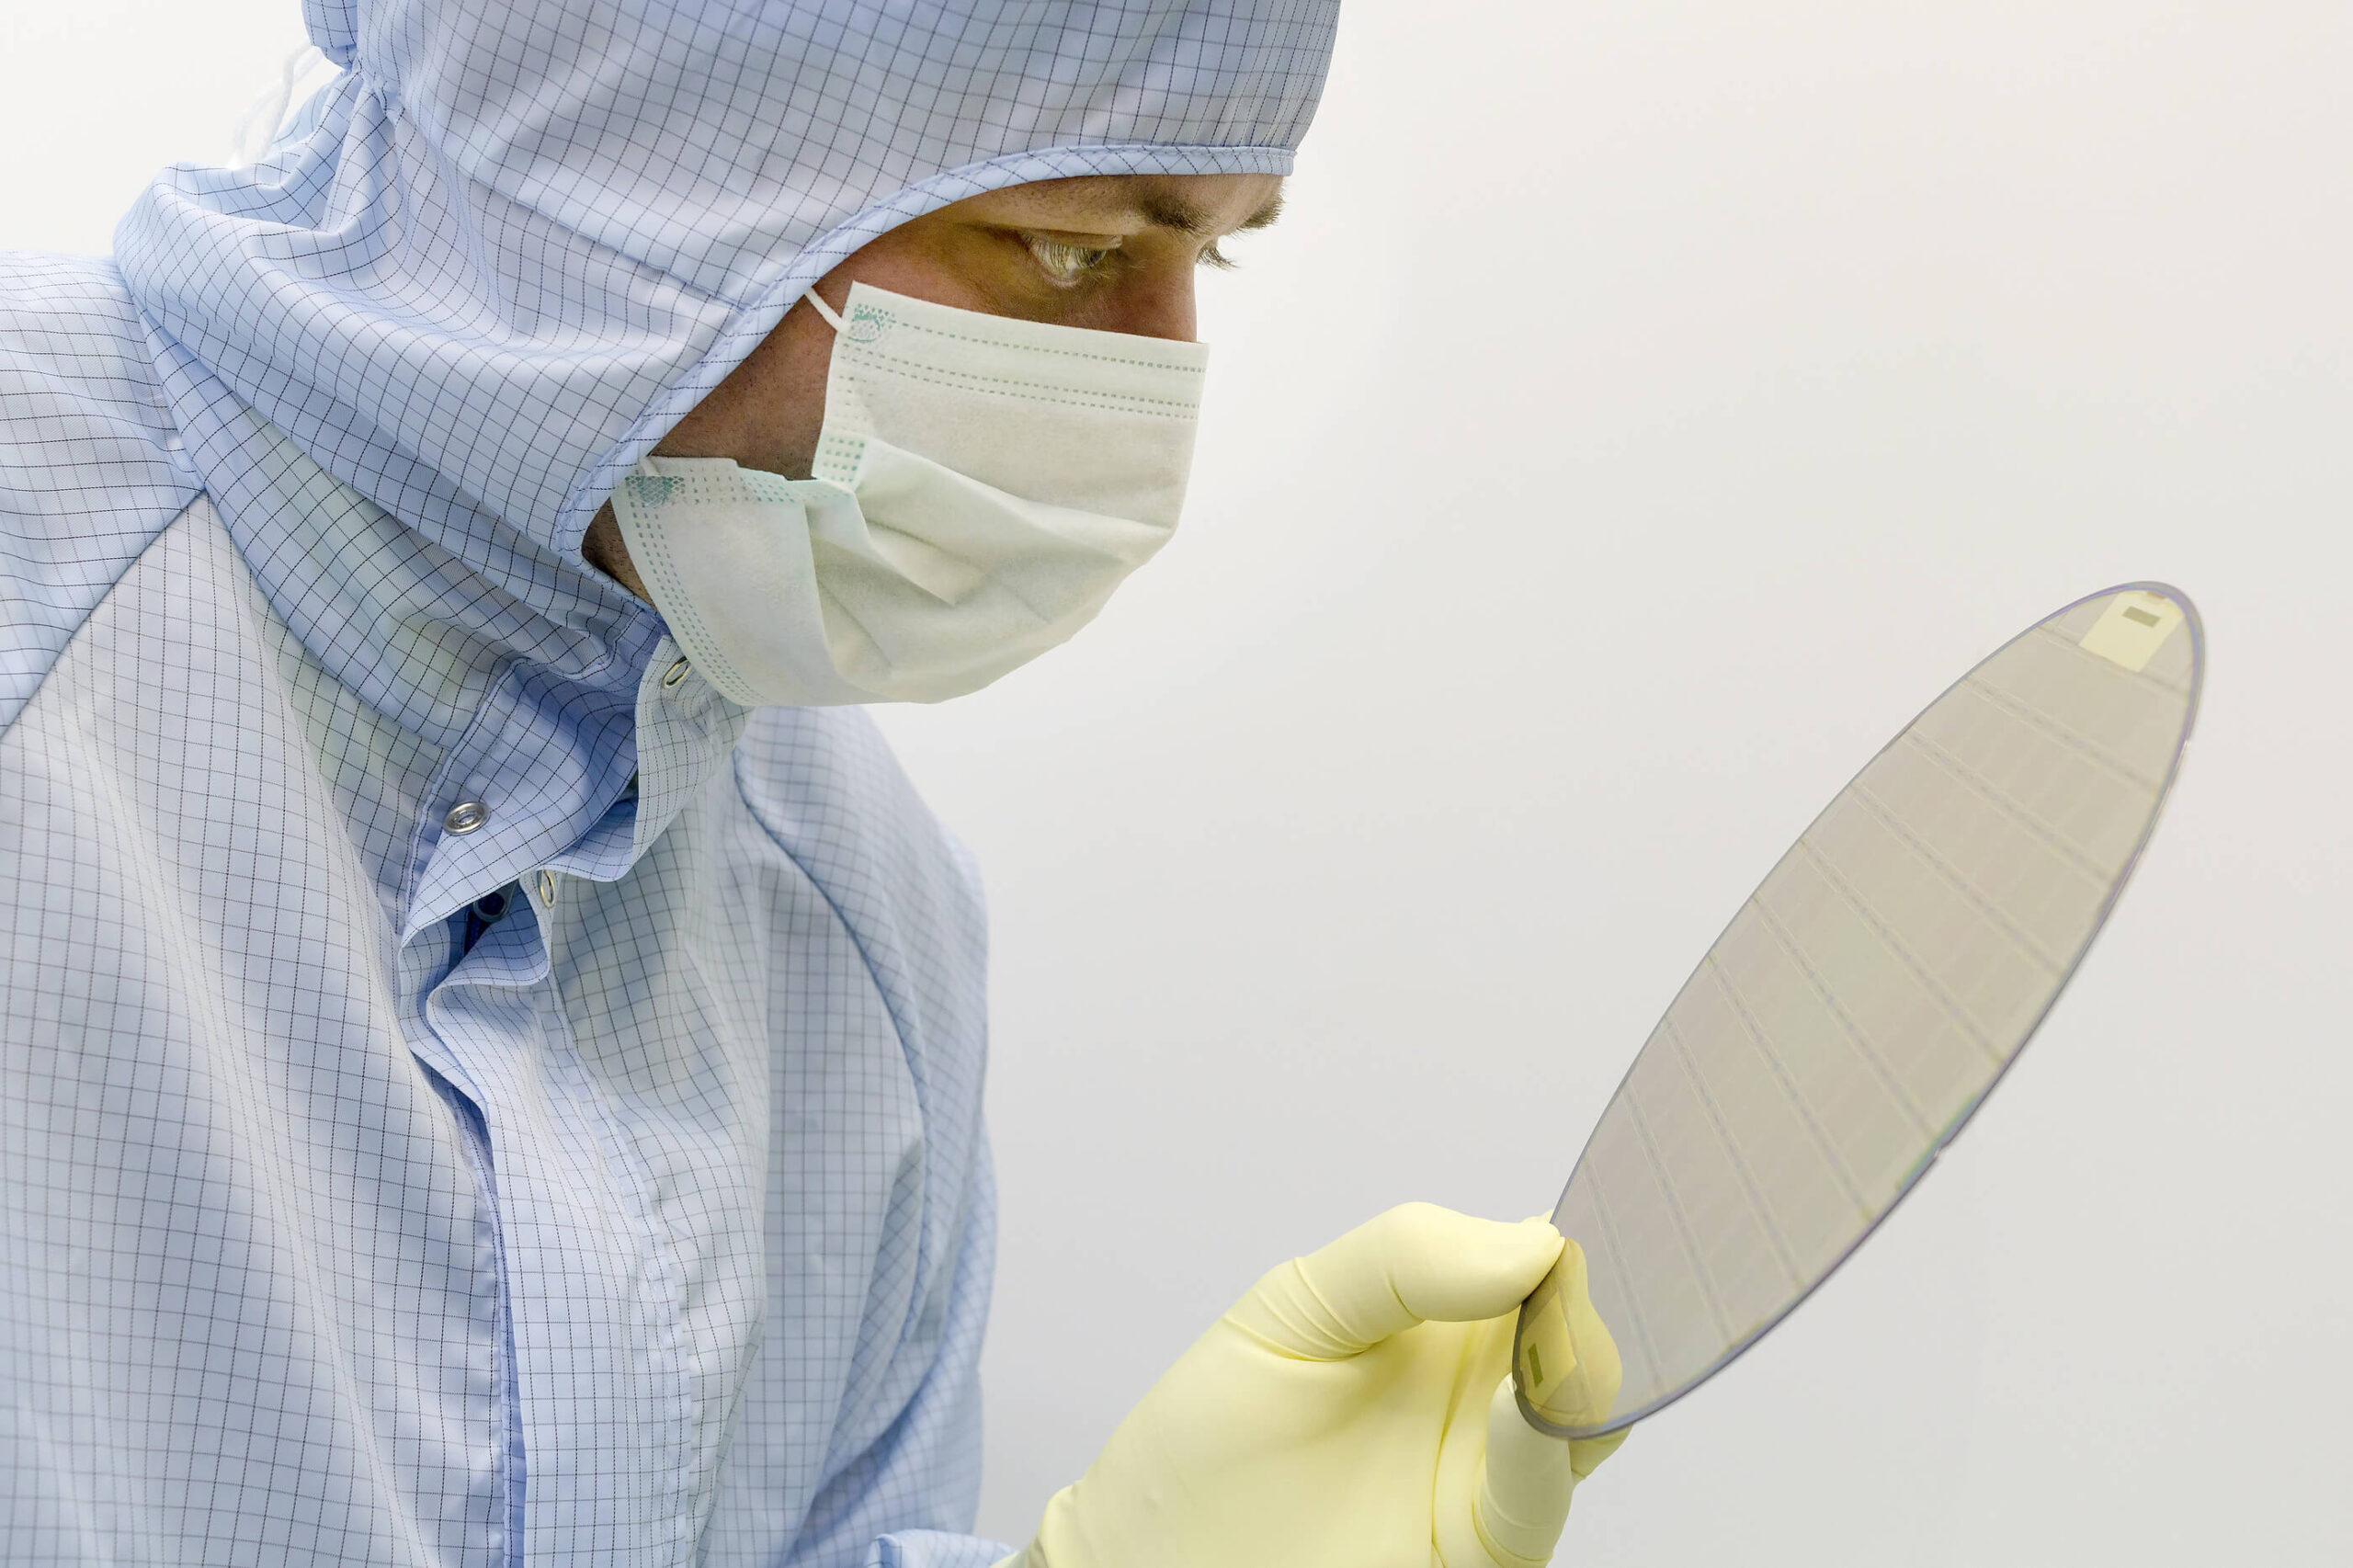 semiconductor wafer, person in bunny suit